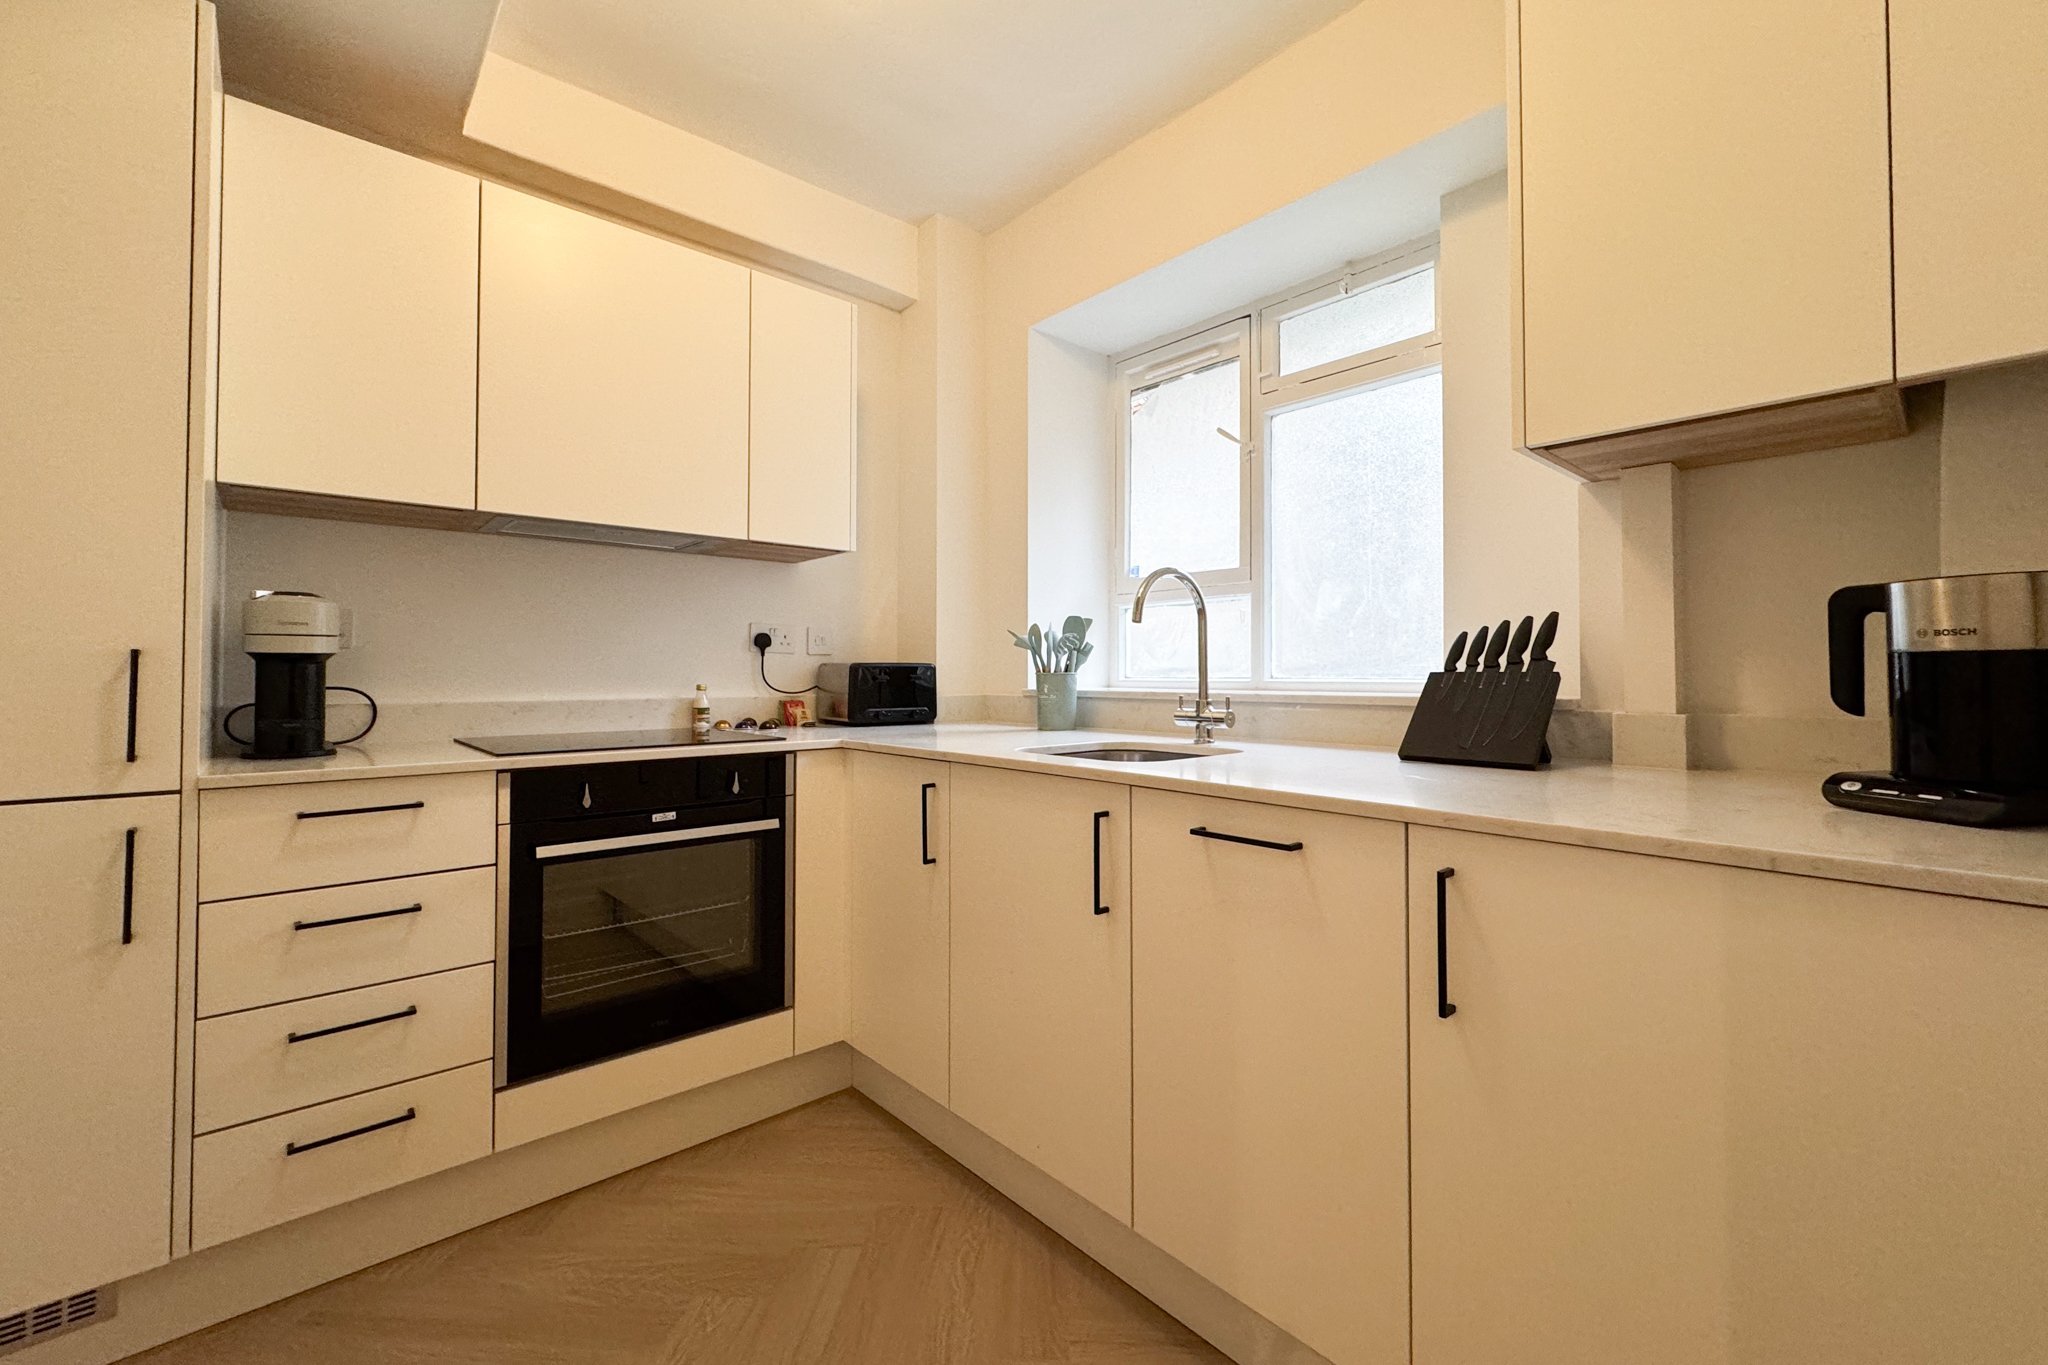 9. Frewell Road Apartments Holborn Kitchen Top.jpg